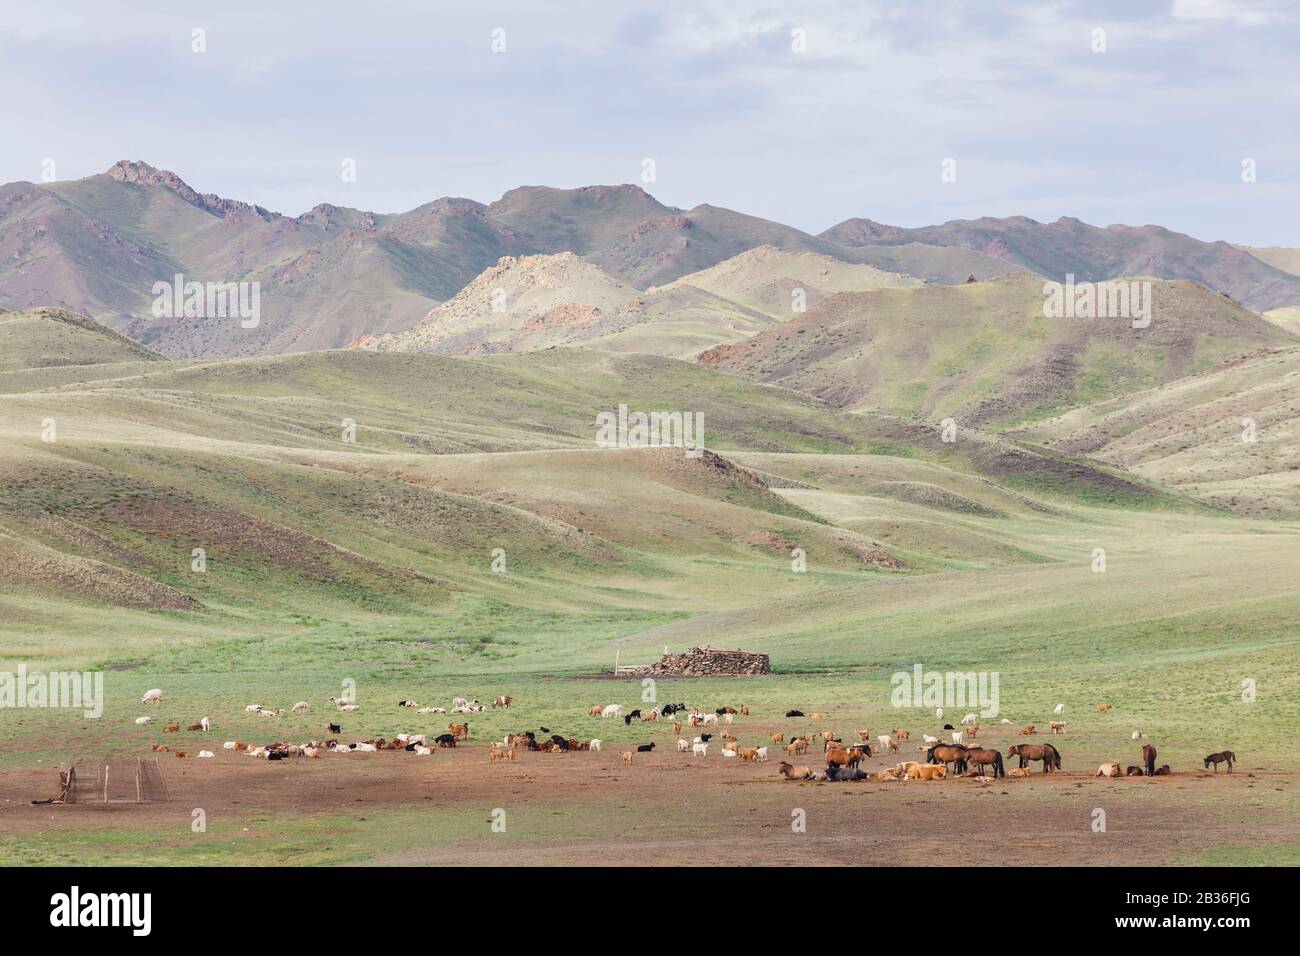 Mongolia, Omnogovi province, near Dalanzadgad, herd of goats, sheep and horses in the grassy steppe Stock Photo